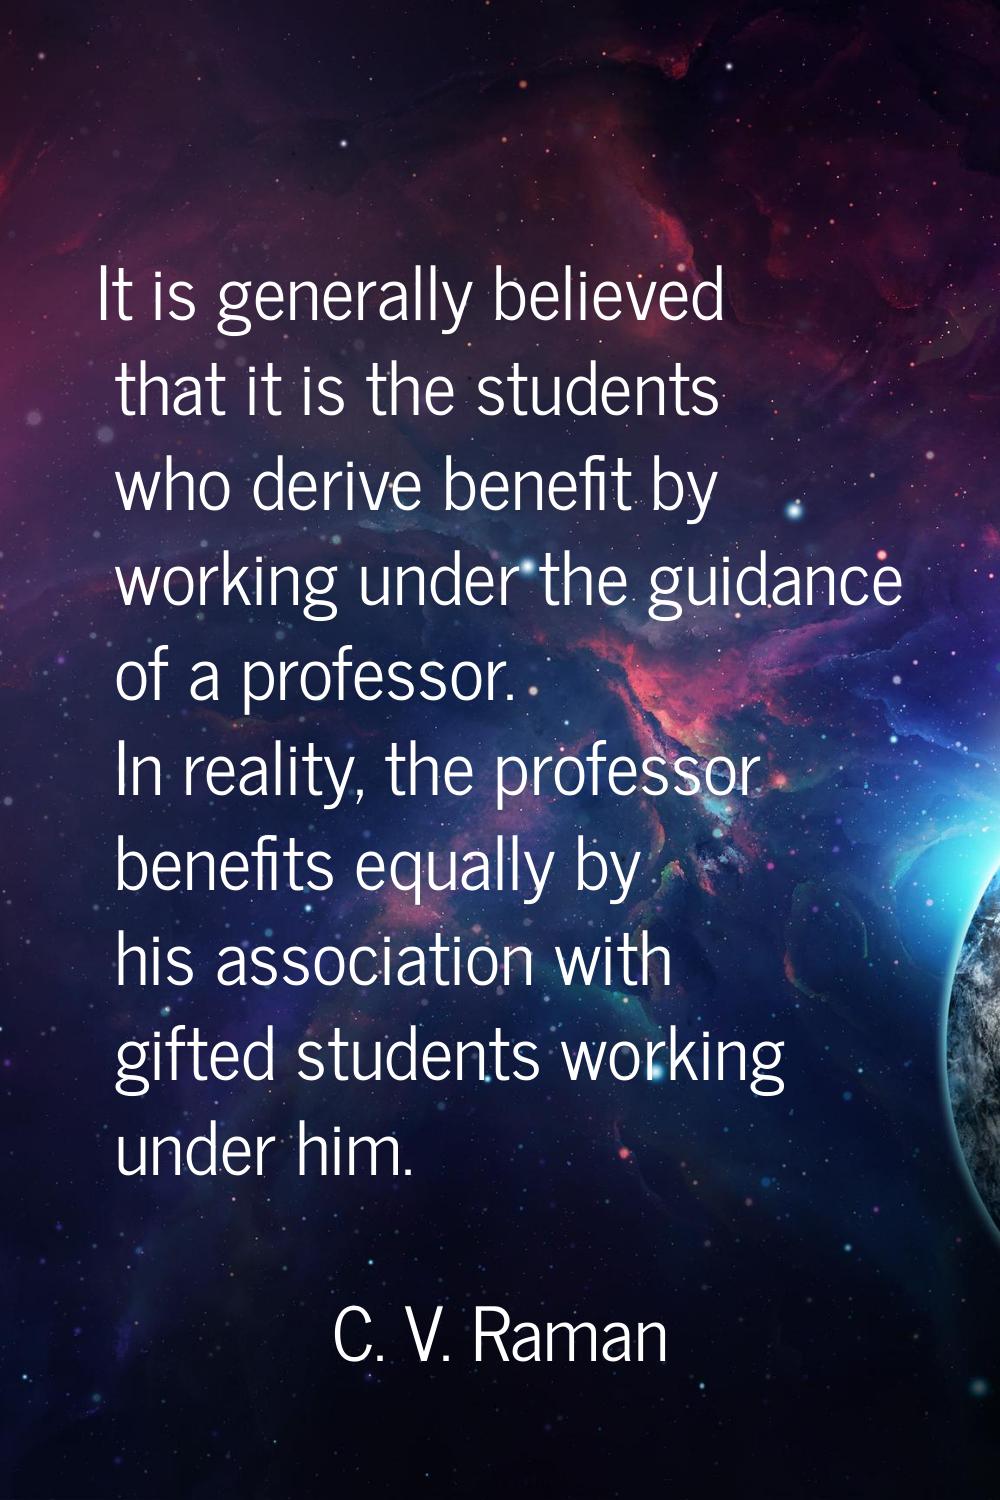 It is generally believed that it is the students who derive benefit by working under the guidance o